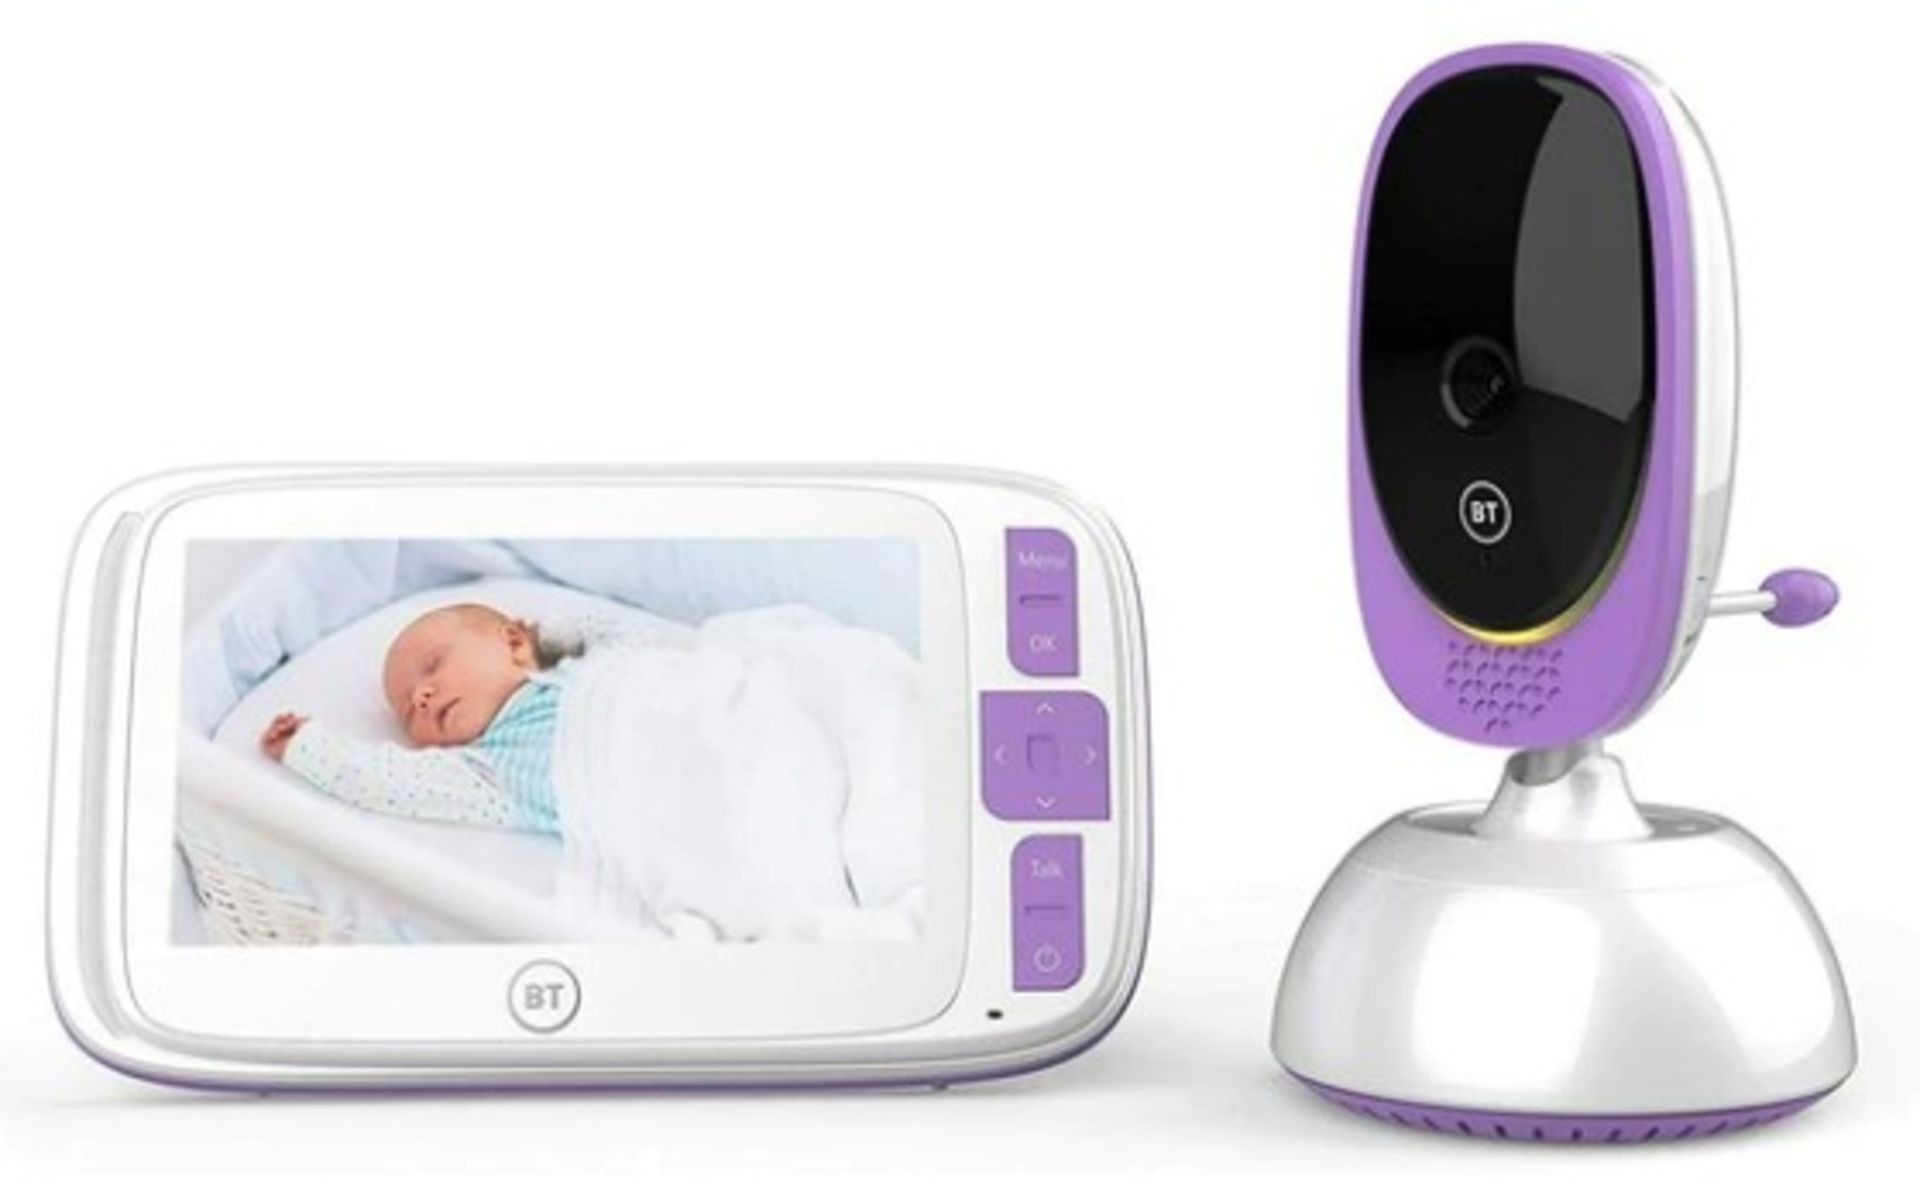 BT Smart Video Baby Monitor with 5 inch Screen. With a variety of features and functionality the